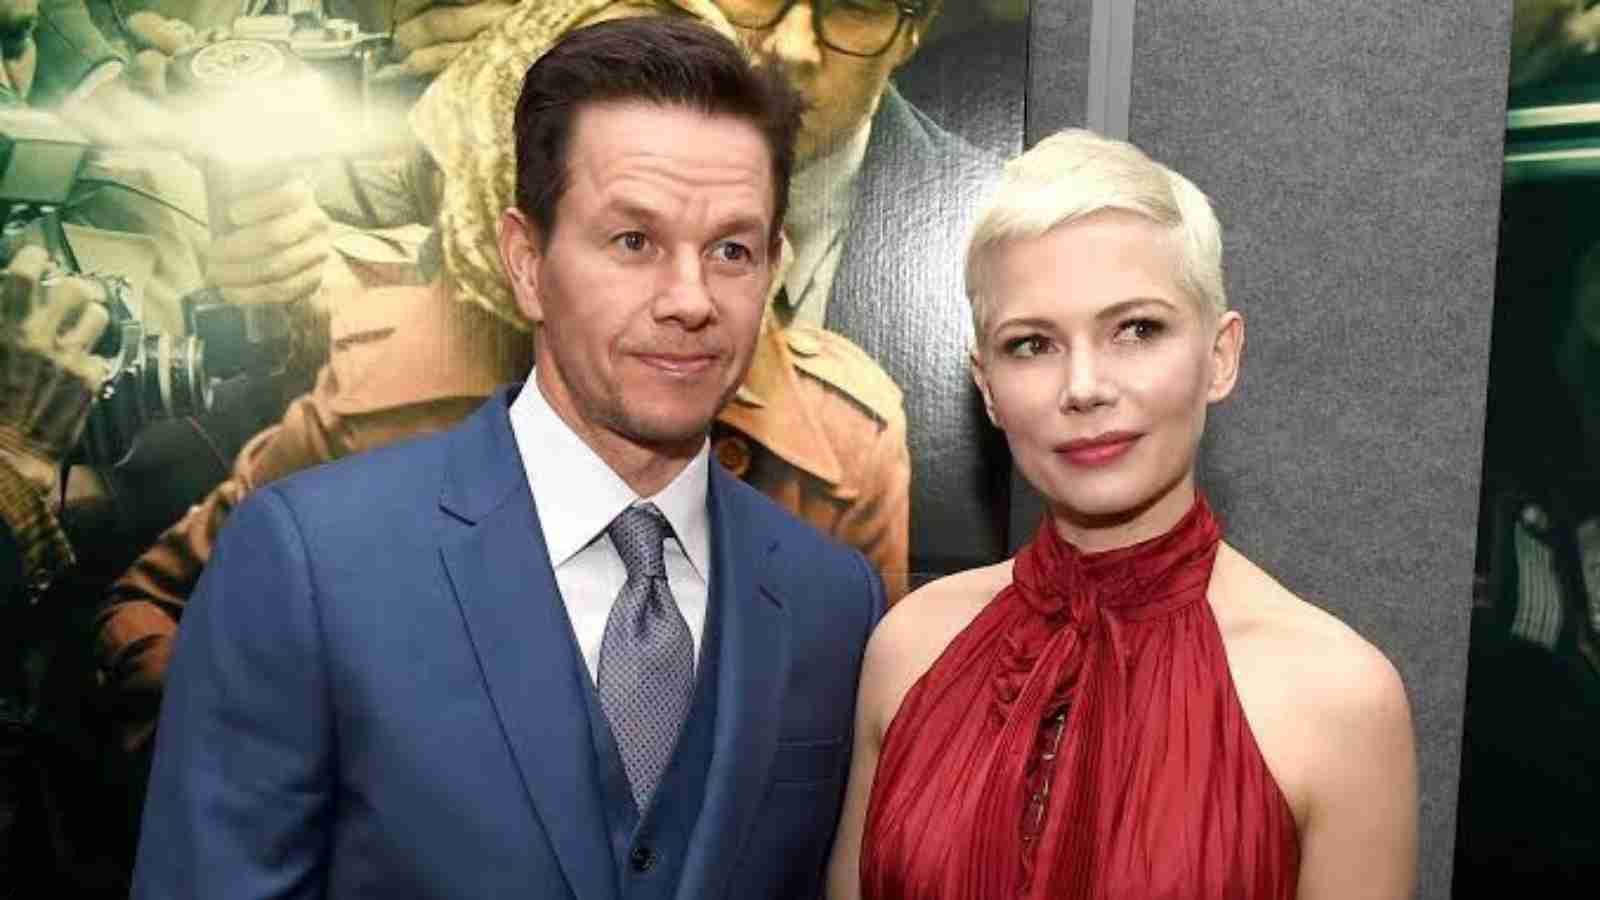 Michelle Williams earned less than 1% of what her male co-star, Mark Wahlberg earned.